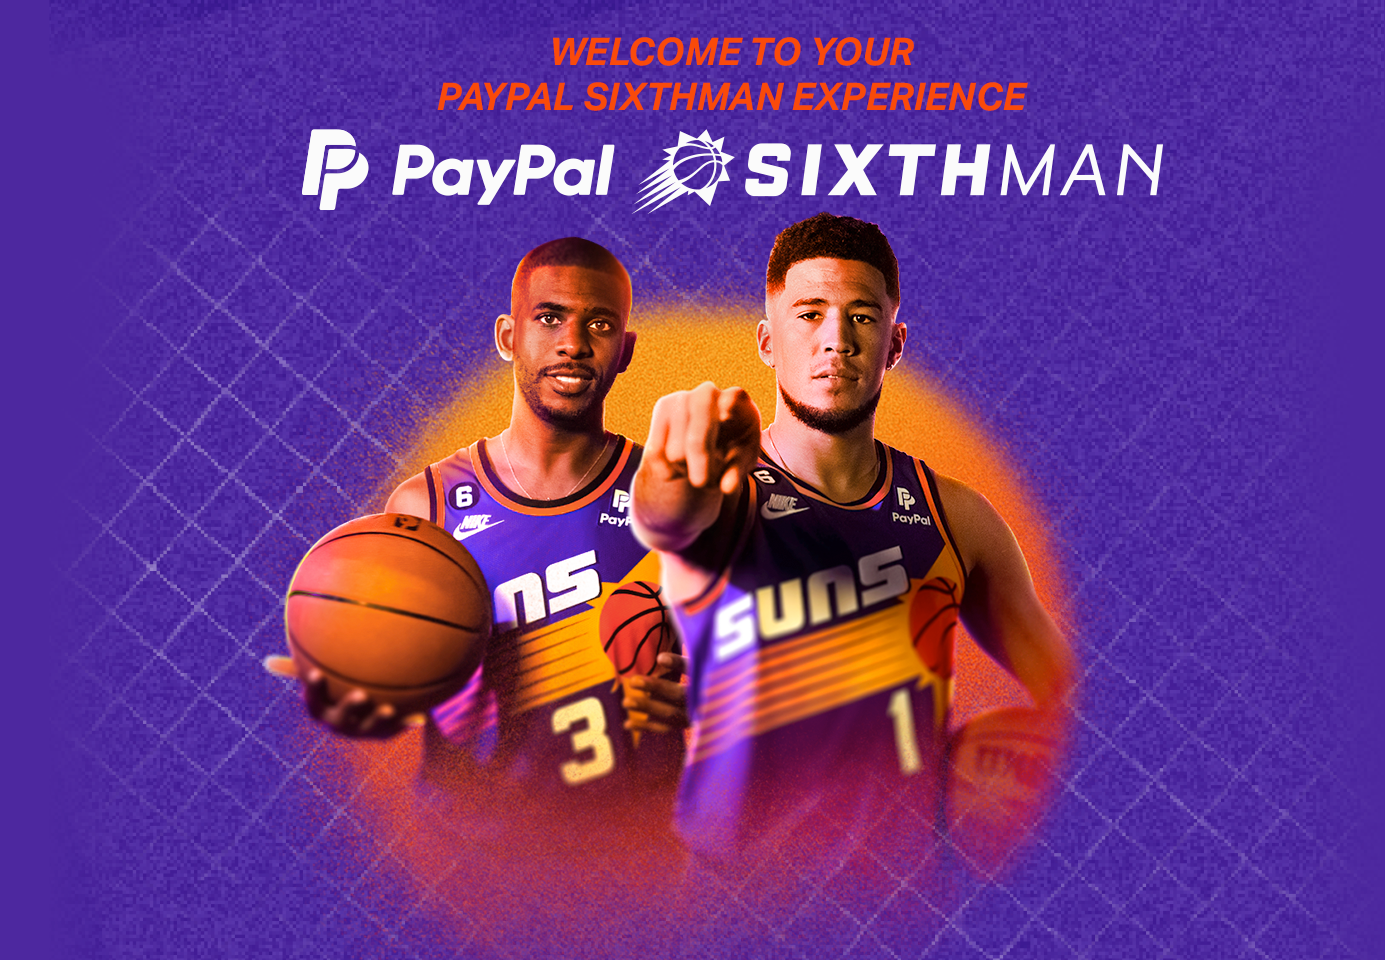 PayPal Sixthman Experience